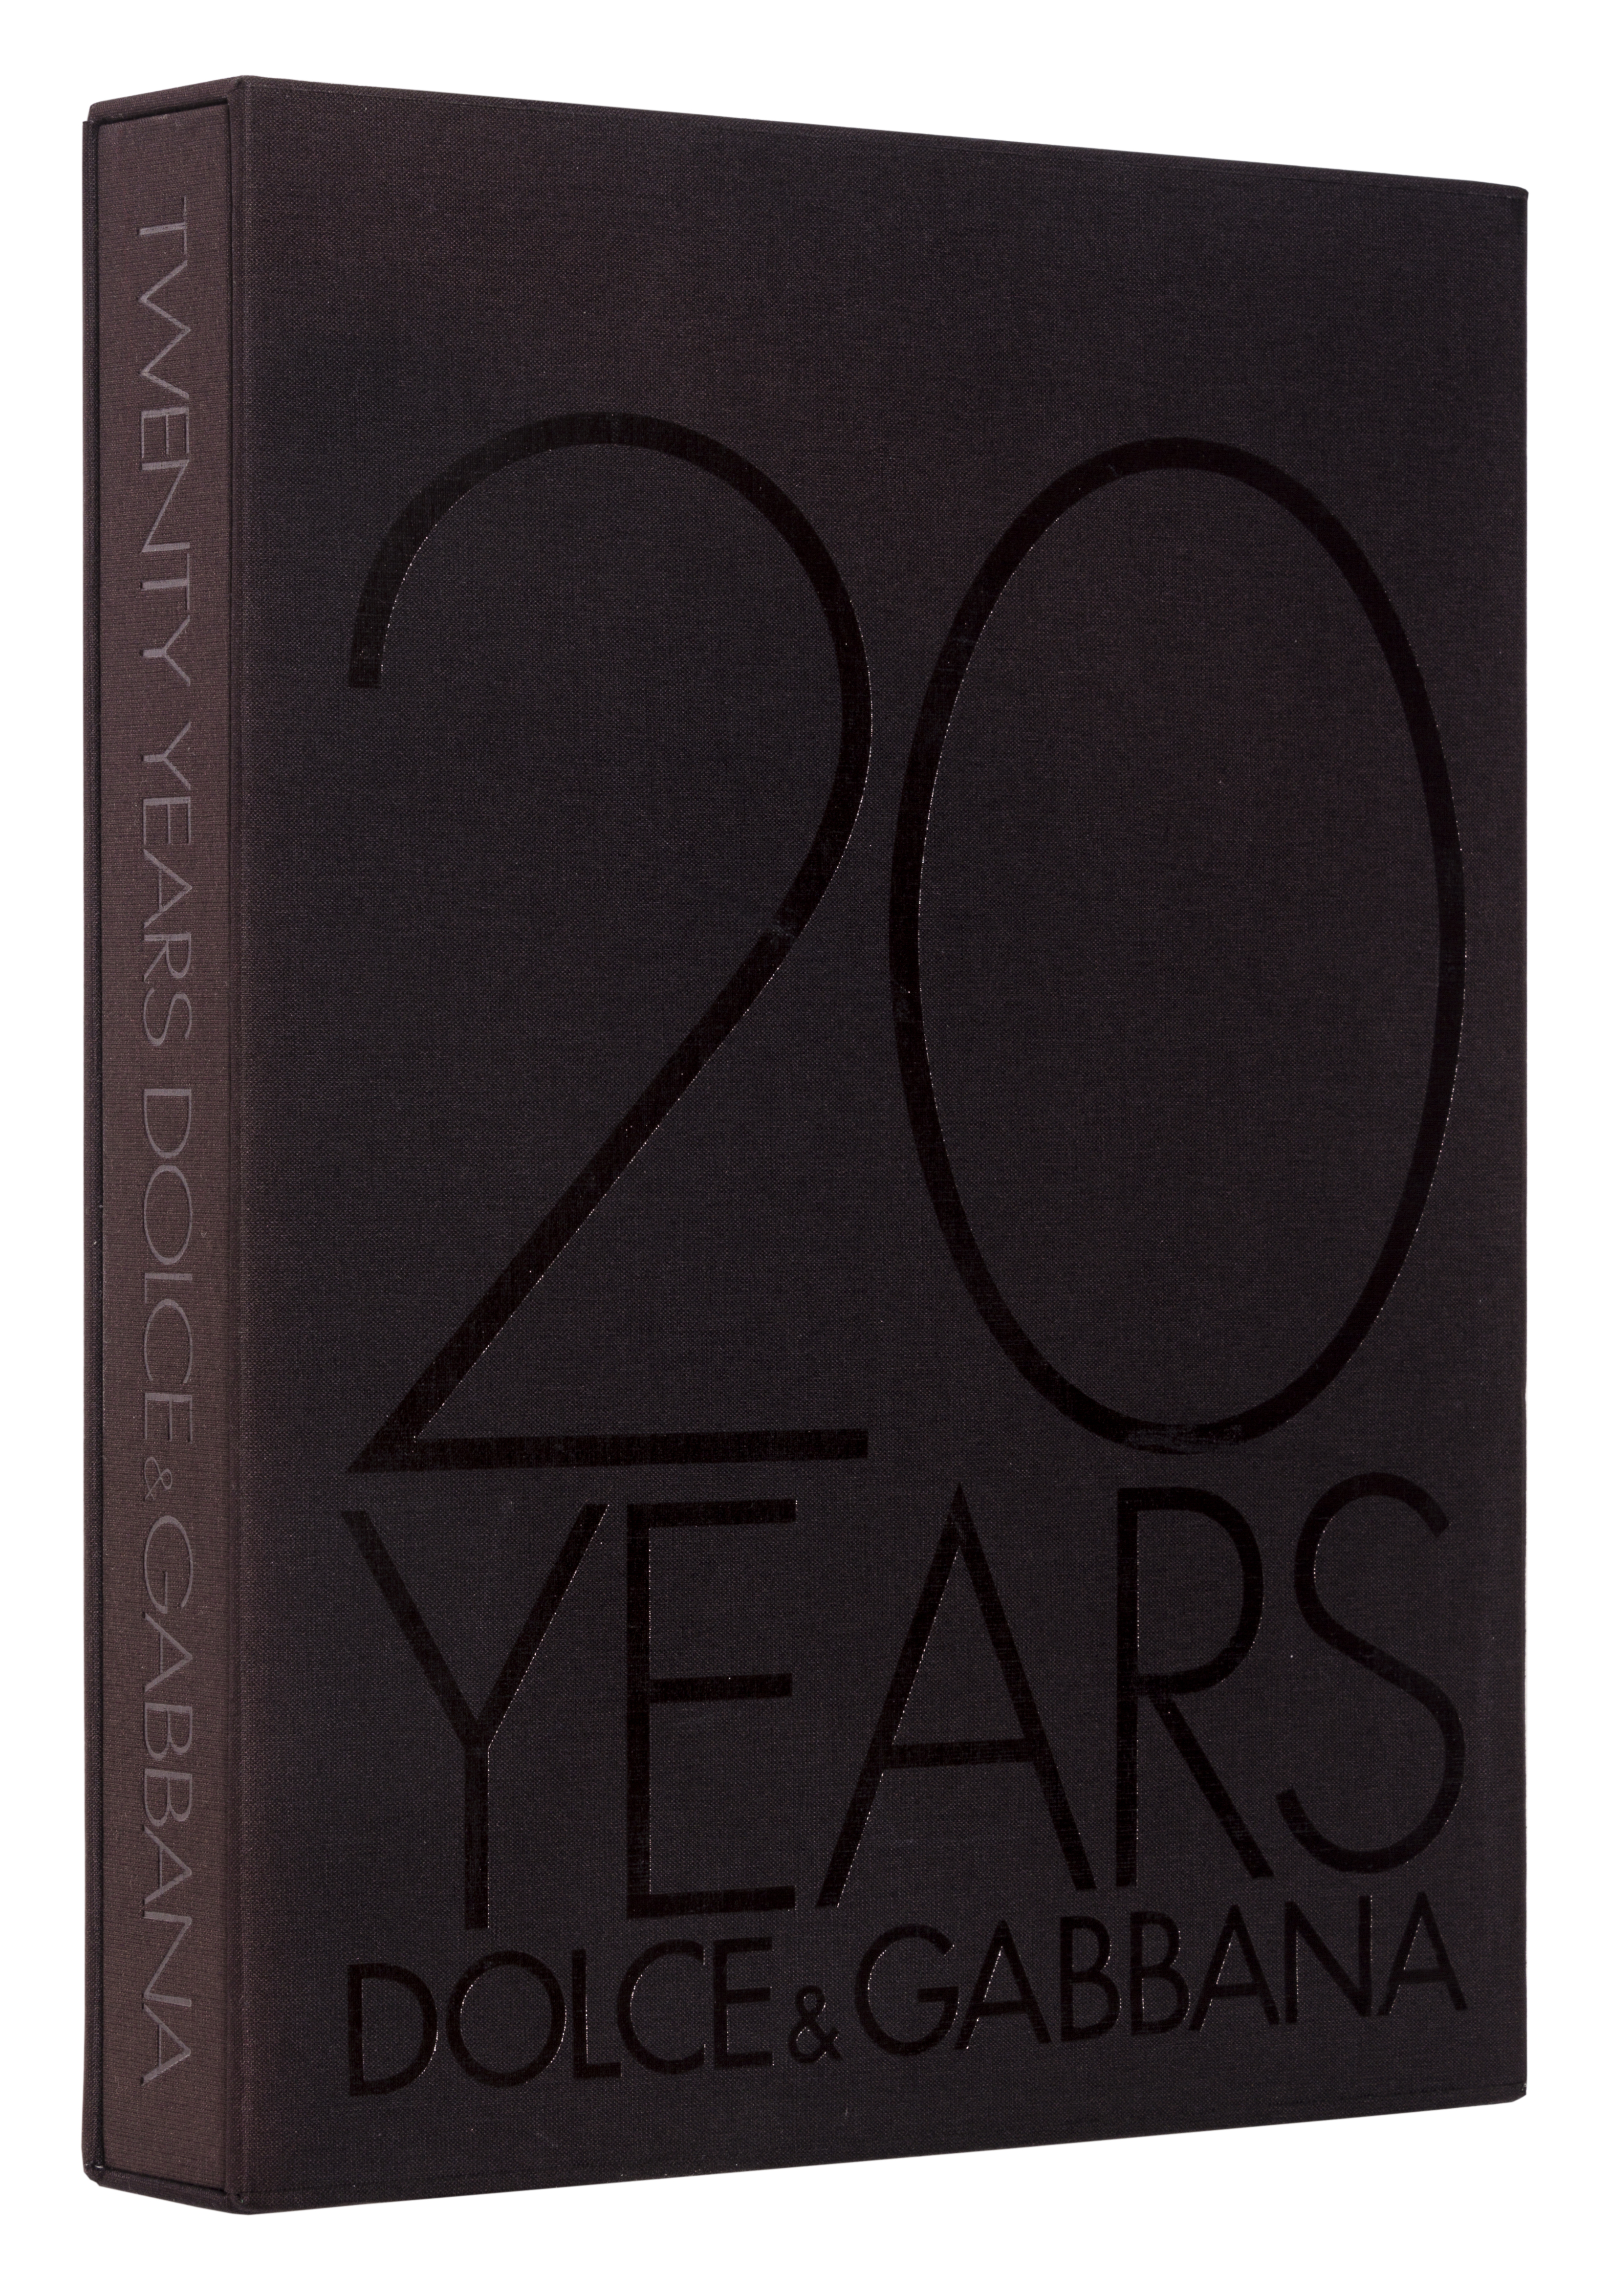 20 Years Dolce & Gabbana - 5 Continents Editions